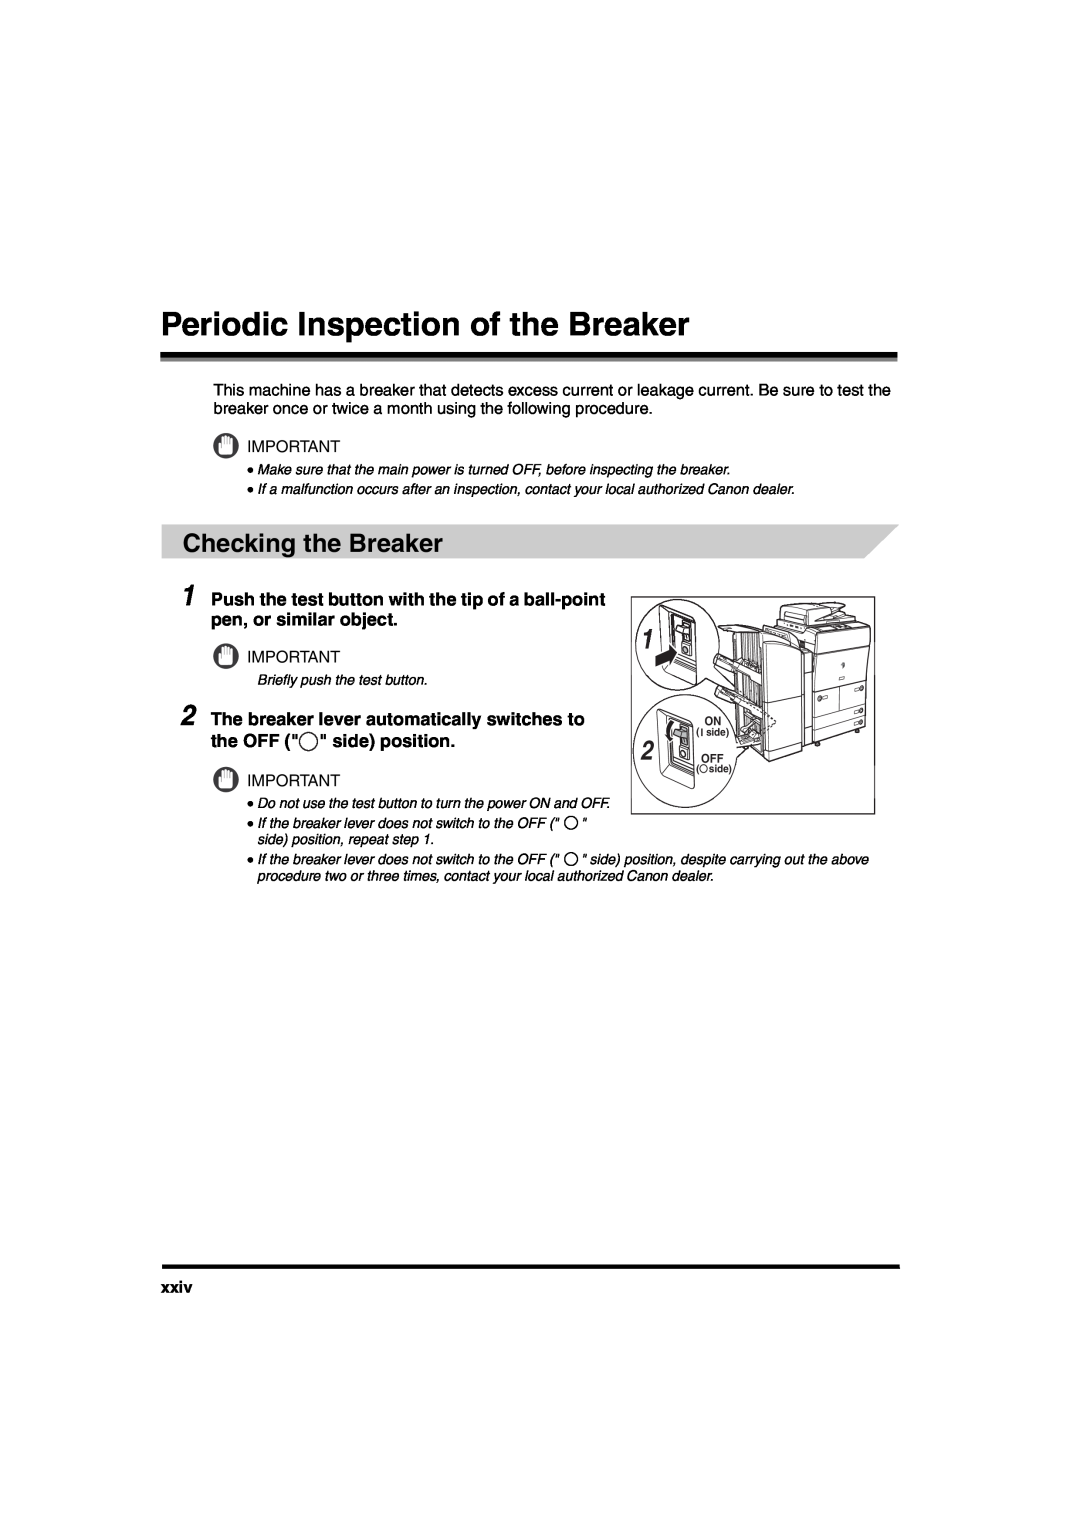 Canon iR6570 manual Periodic Inspection of the Breaker, Checking the Breaker, xxiv 